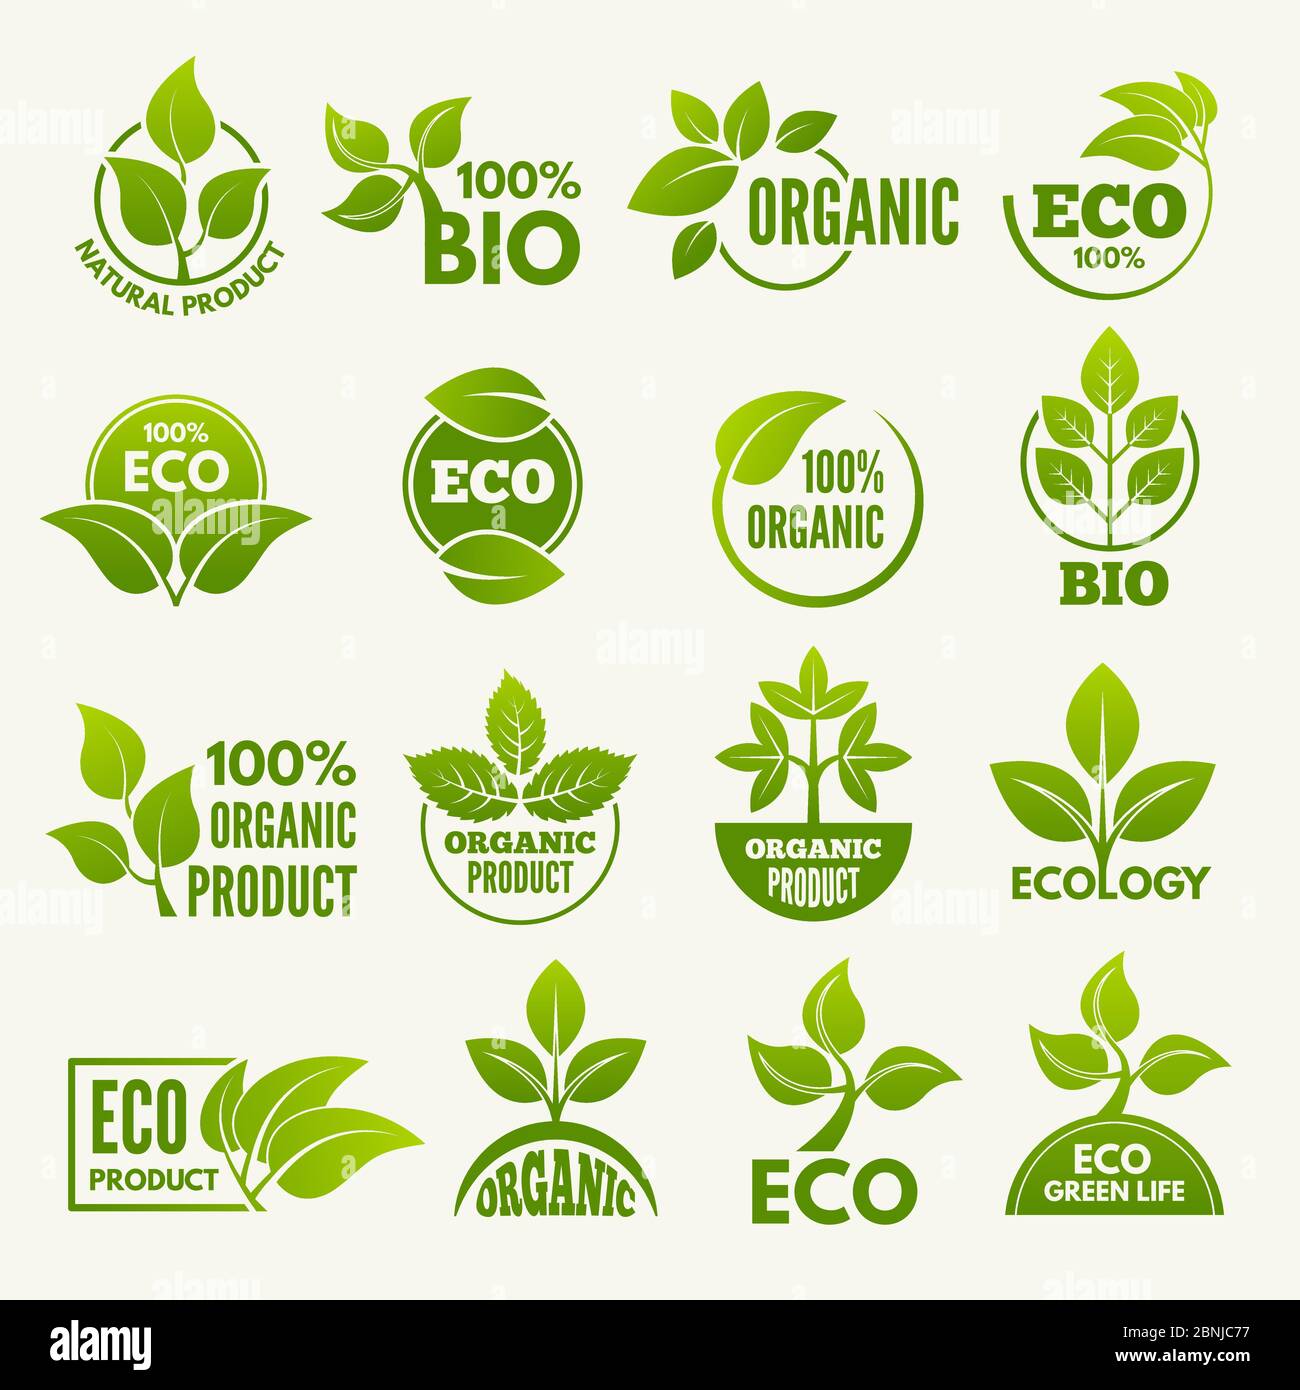 Logos of eco style. Business concepts to protect nature Stock Vector